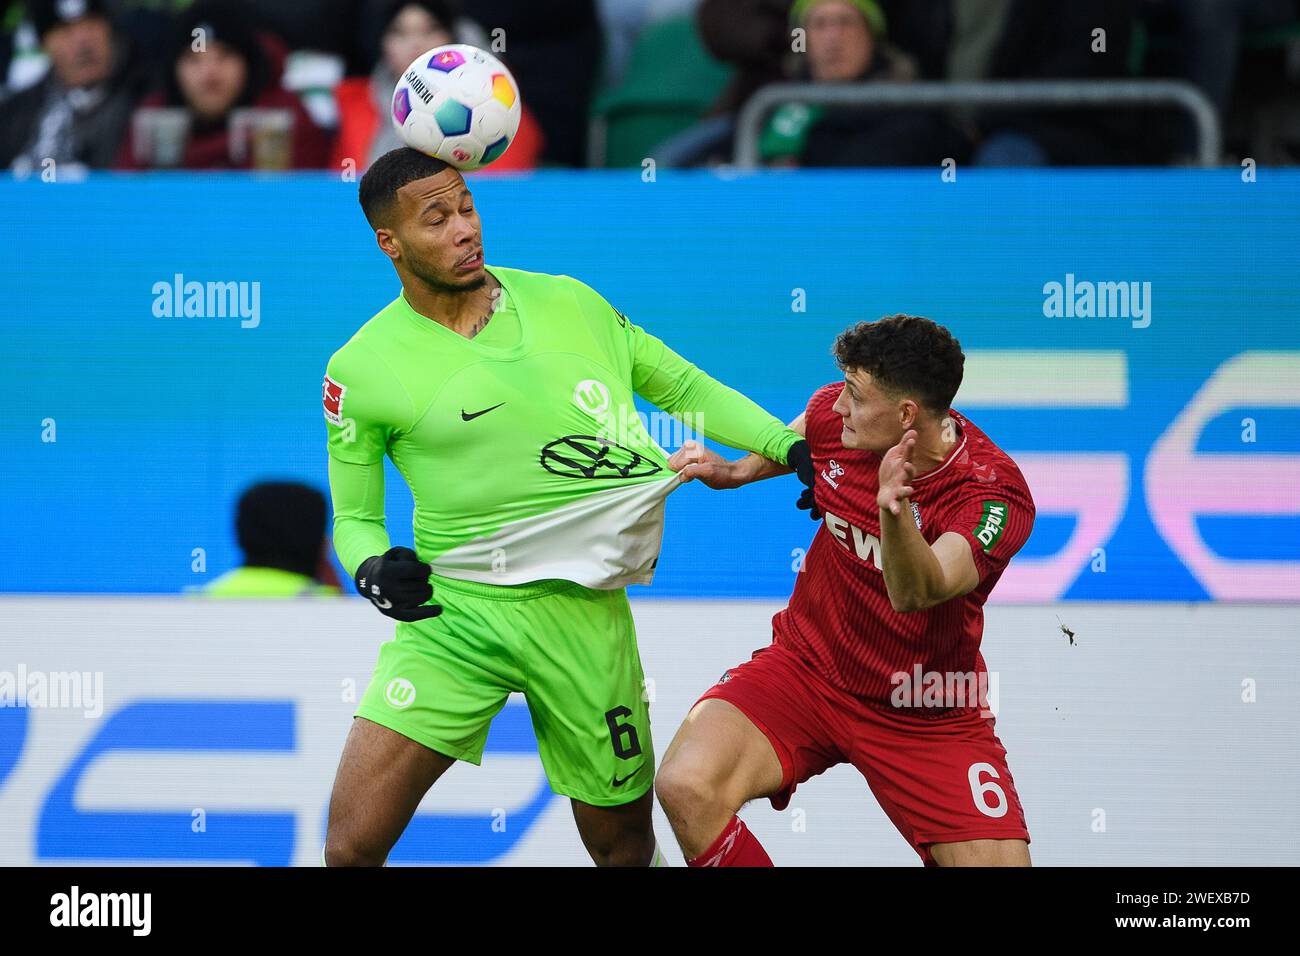 Wolfsburg, Germany. 27th Jan, 2024. Soccer, Bundesliga, VfL Wolfsburg - 1. FC Köln, Matchday 19, Volkswagen Arena. Wolfsburg's Aster Vranckx (l) plays against Cologne's Eric Martel. Credit: Swen Pförtner/dpa - IMPORTANT NOTE: In accordance with the regulations of the DFL German Football League and the DFB German Football Association, it is prohibited to utilize or have utilized photographs taken in the stadium and/or of the match in the form of sequential images and/or video-like photo series./dpa/Alamy Live News Stock Photo